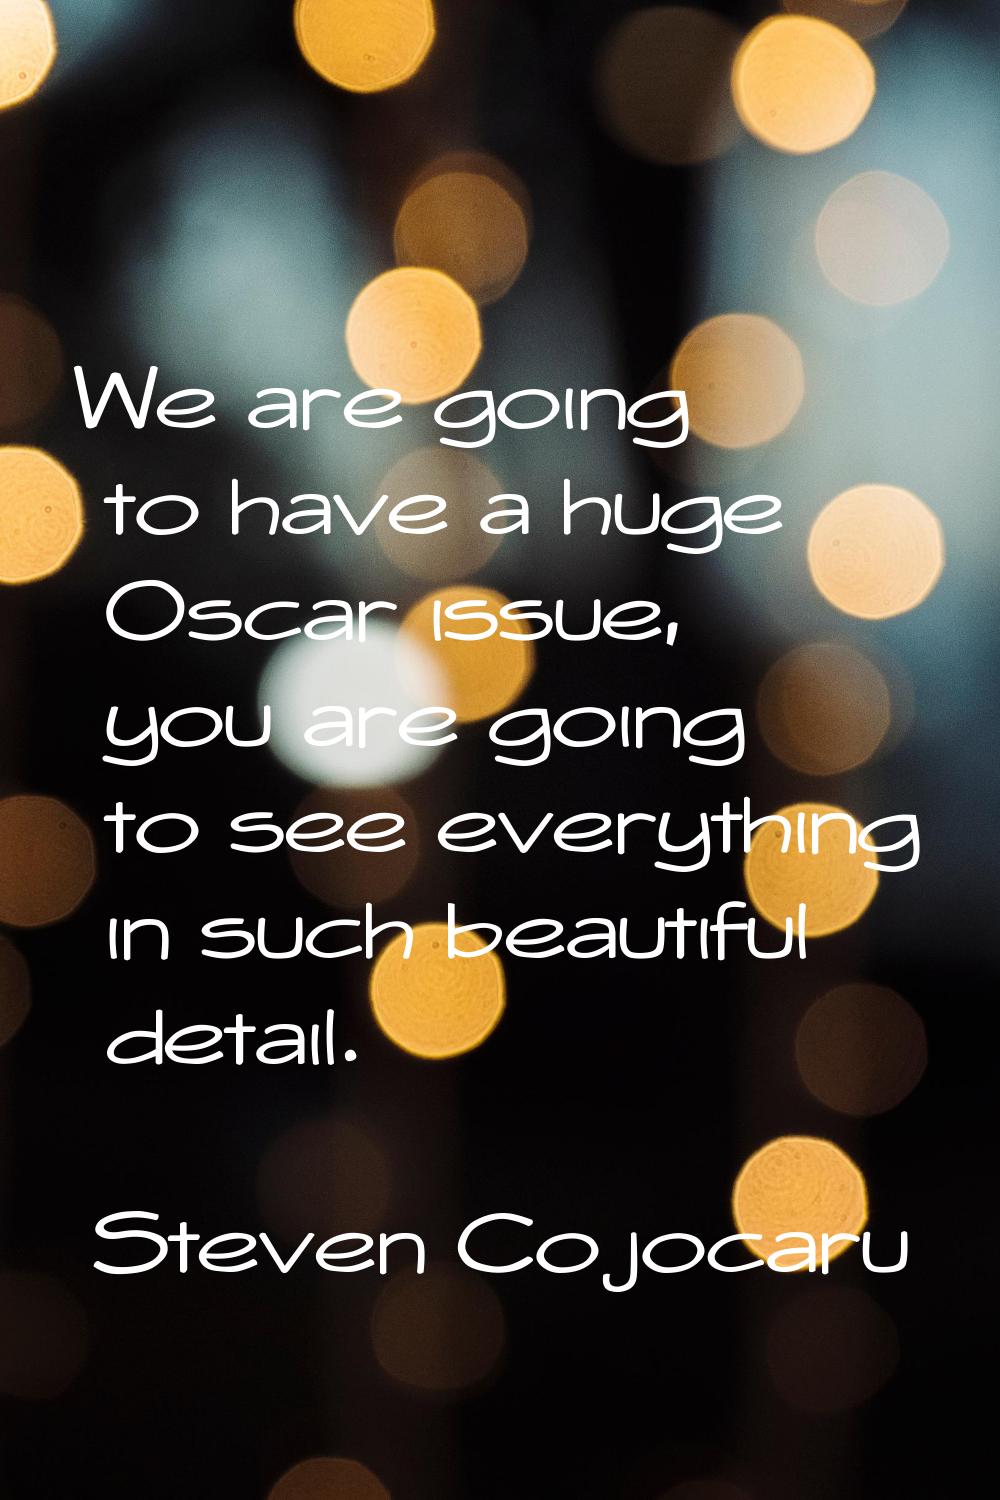 We are going to have a huge Oscar issue, you are going to see everything in such beautiful detail.